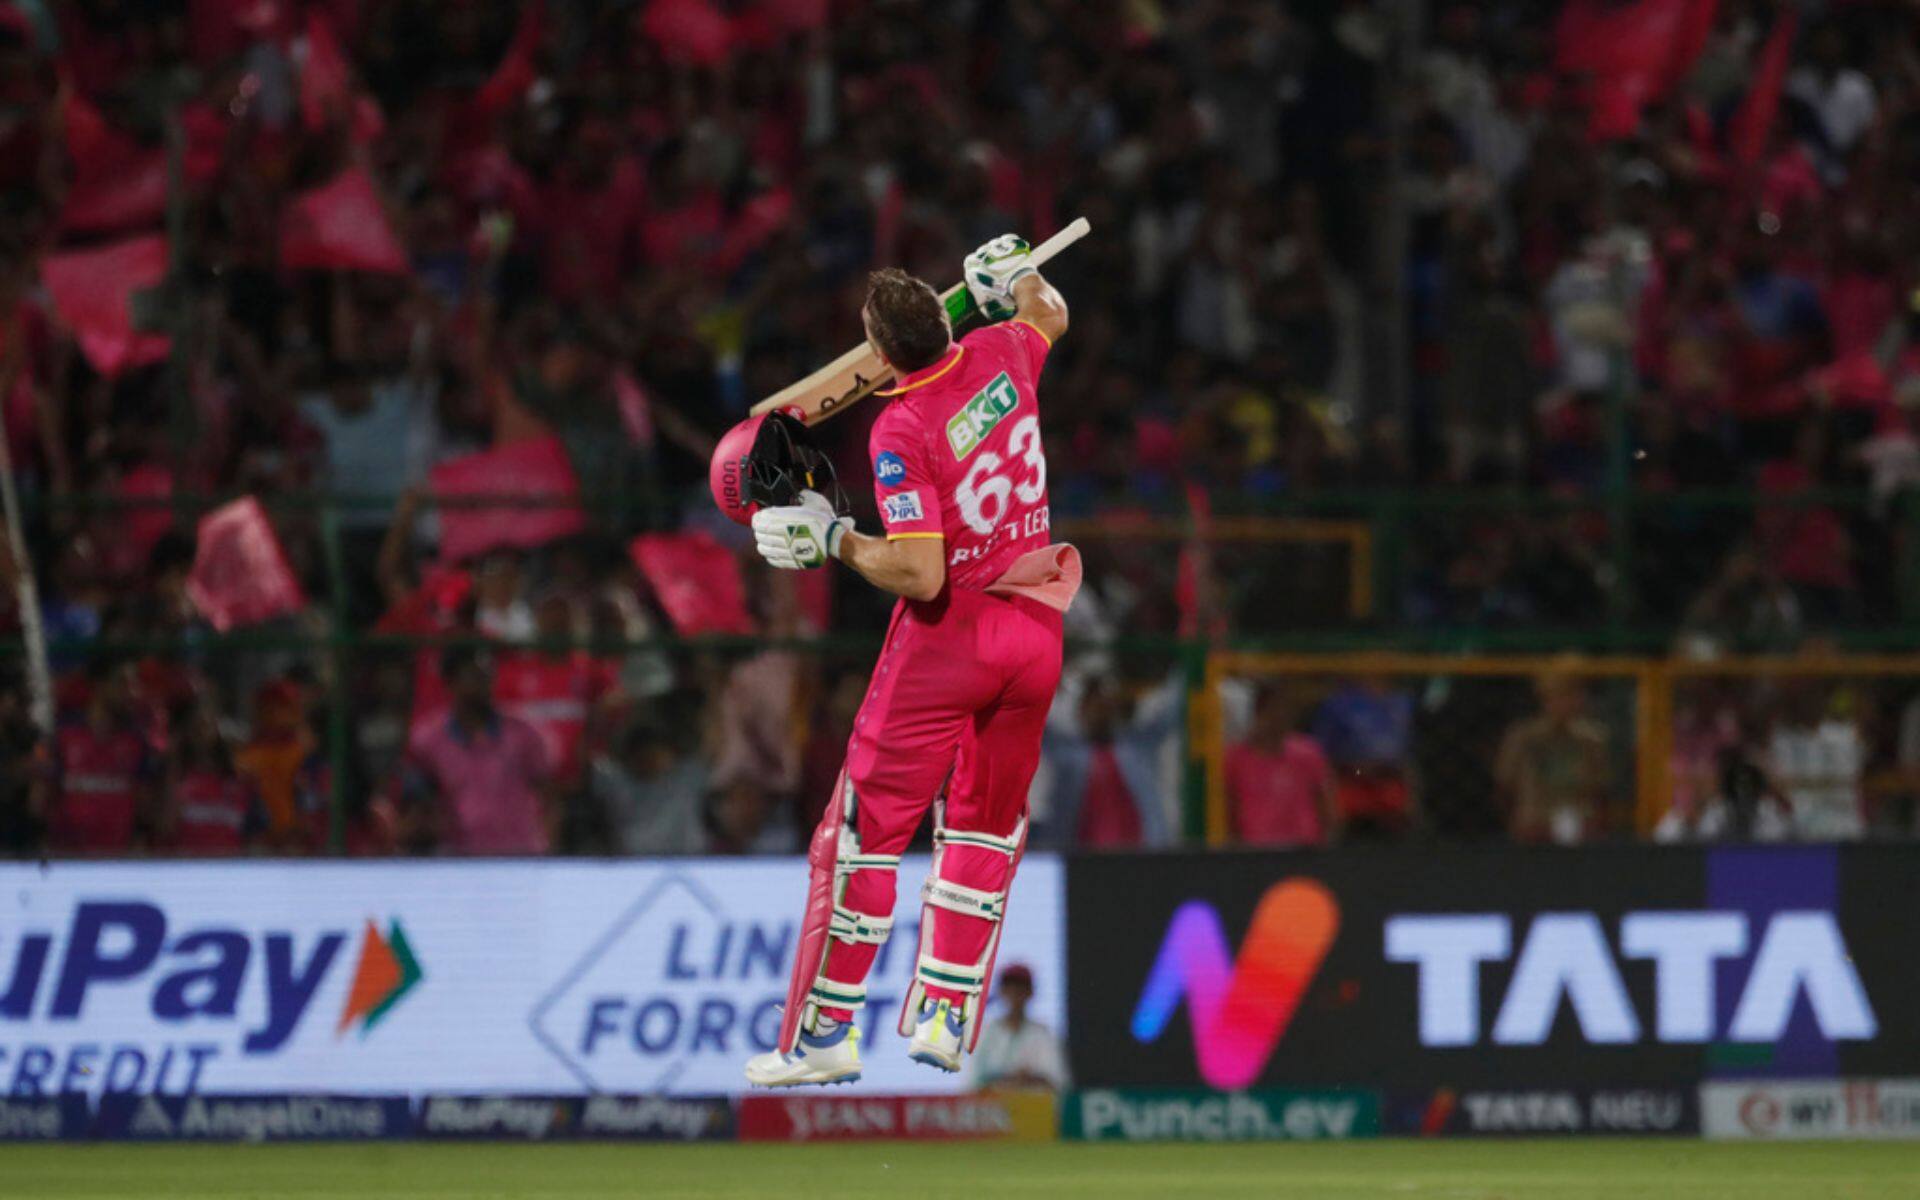 Jos Buttler jumping in the air after hitting 100* vs RCB (AP)